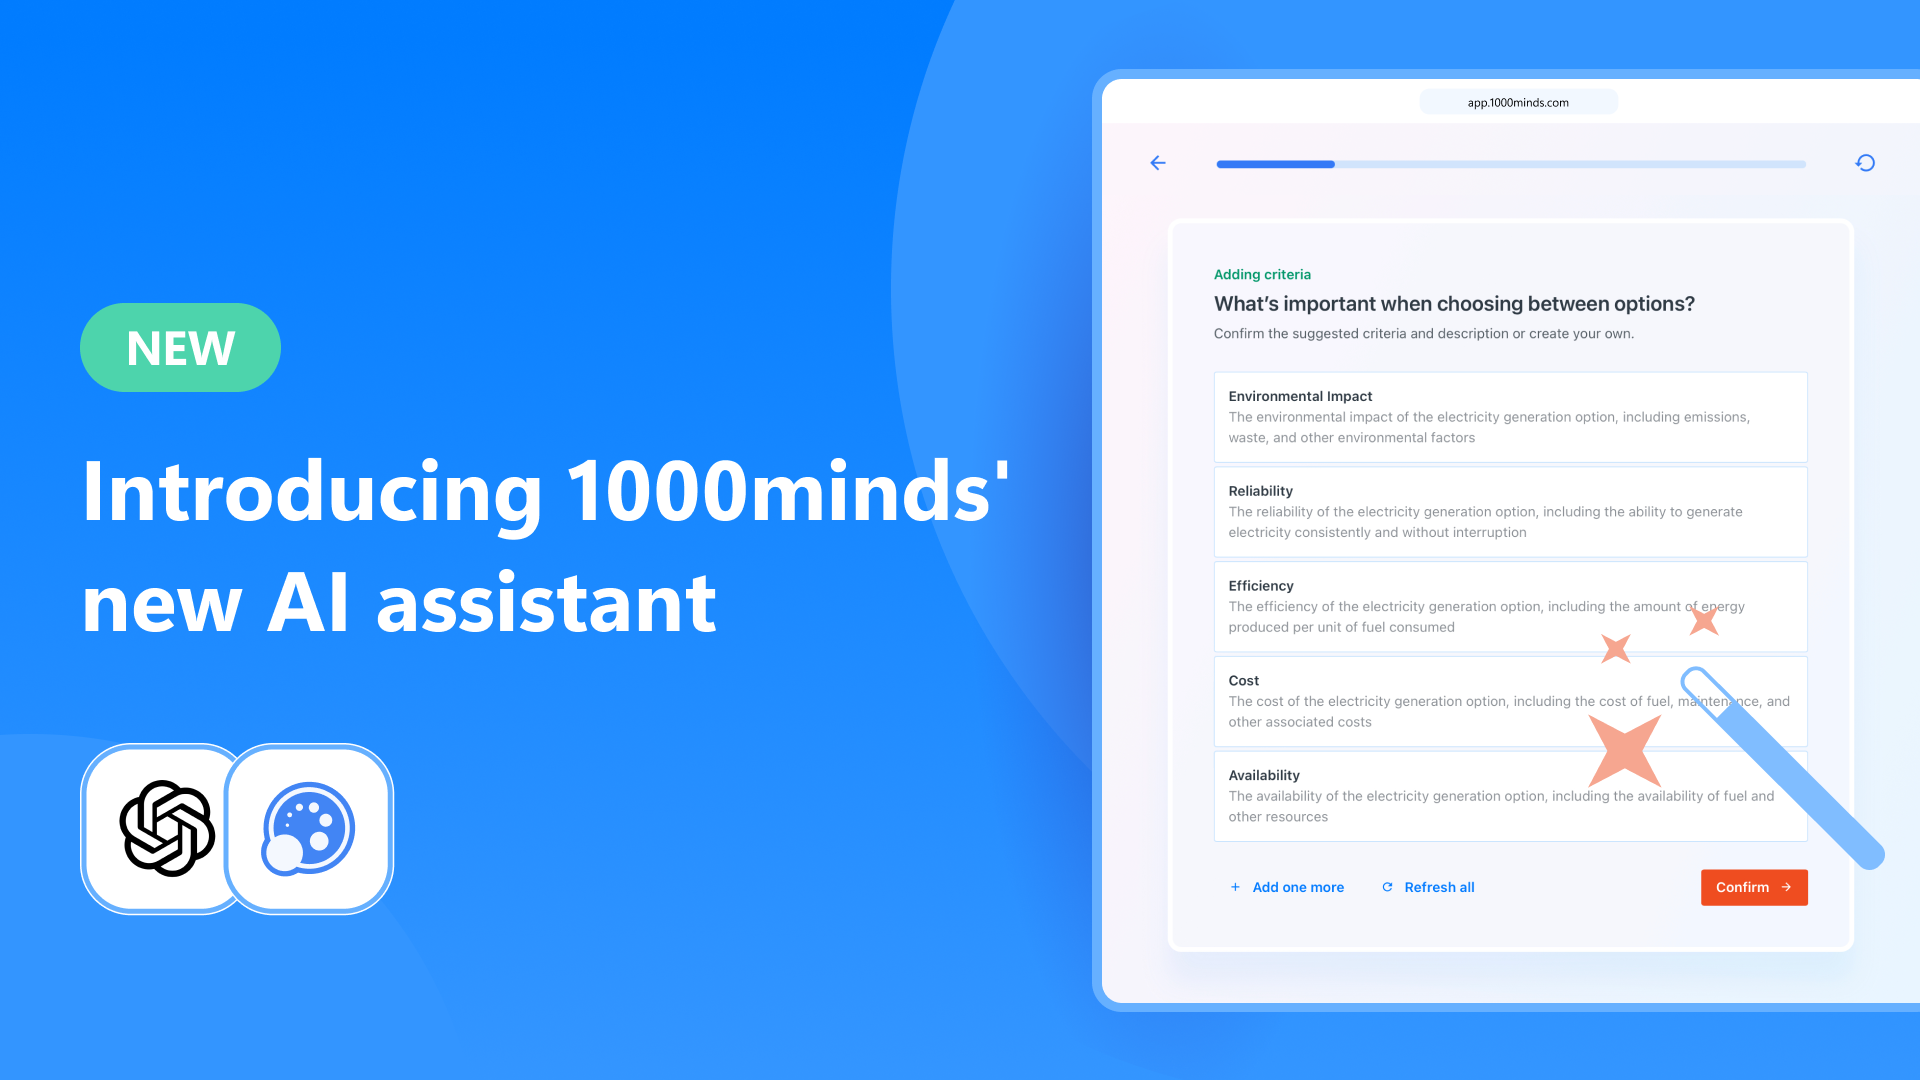 1000minds’ AI assistant: keeping humans in charge of AI assisted decision-making